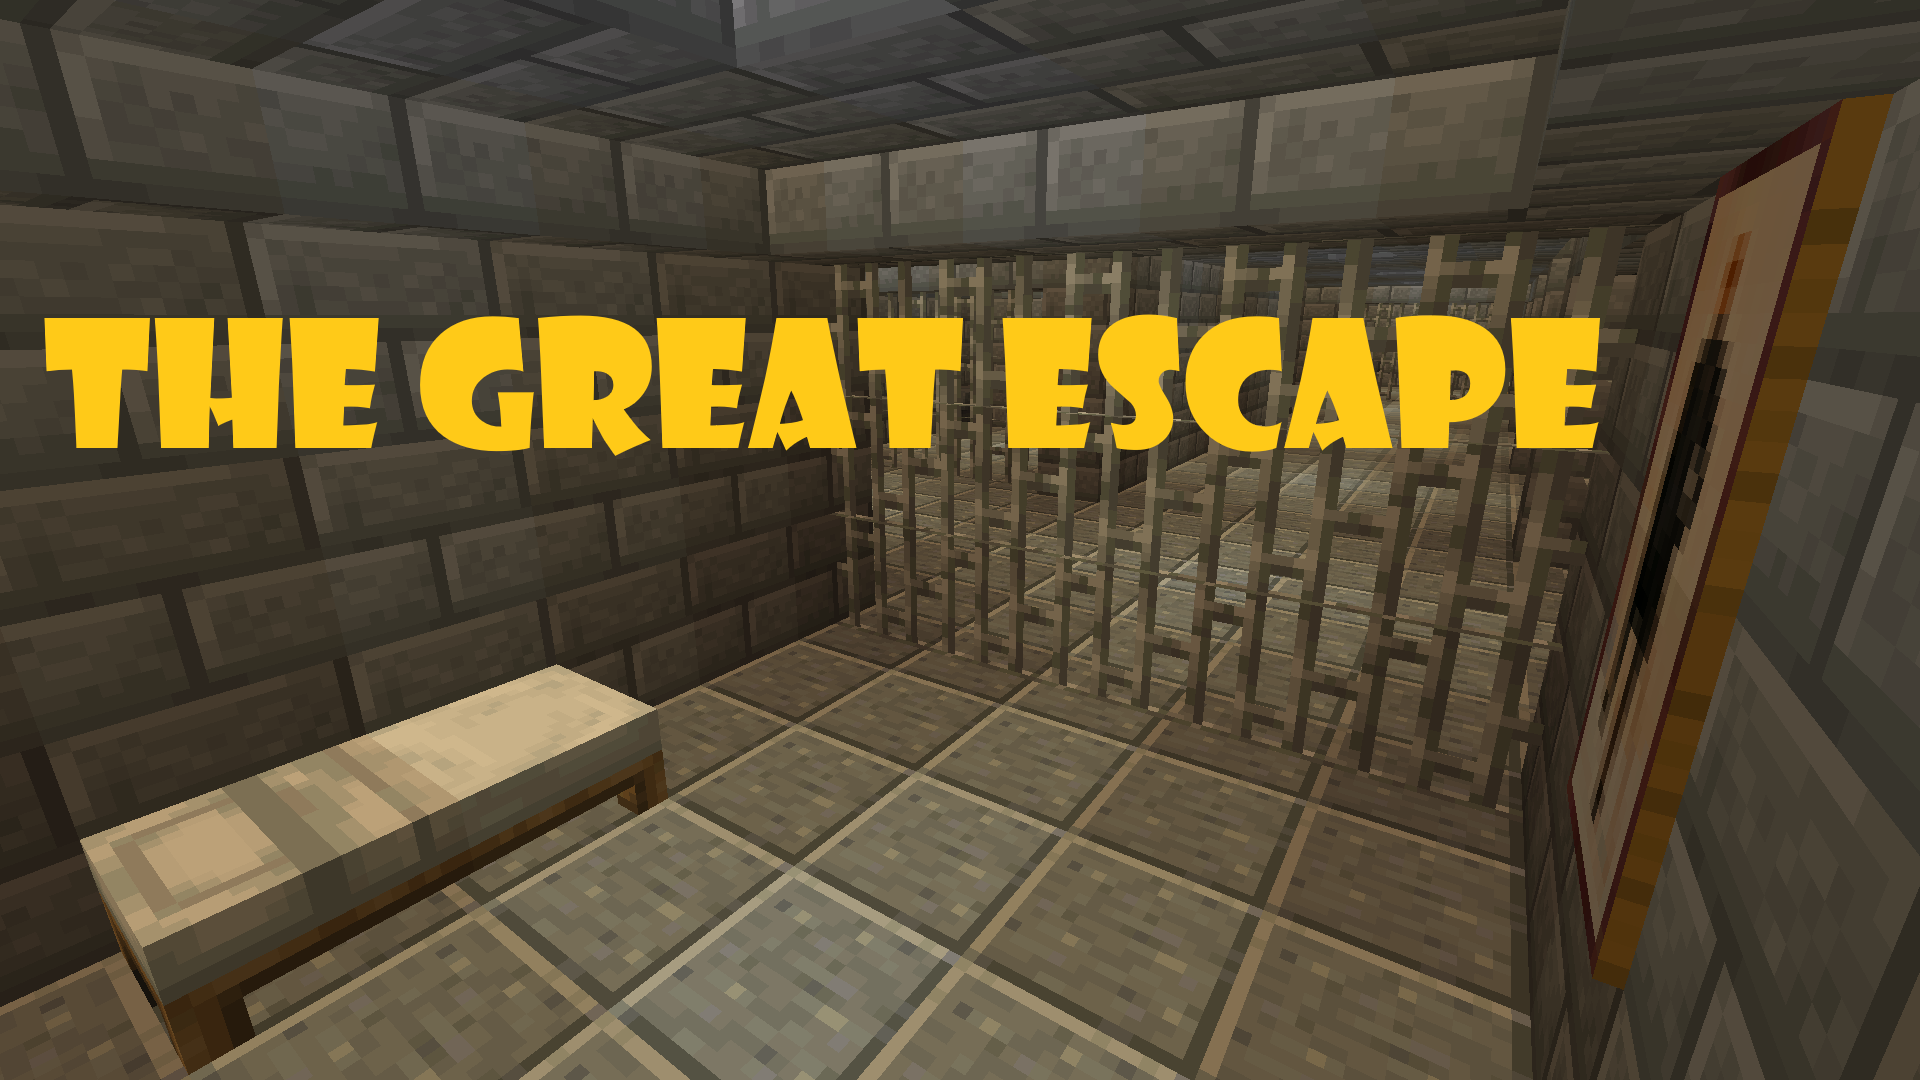 Download THE GREAT ESCAPE! for Minecraft 1.14.4